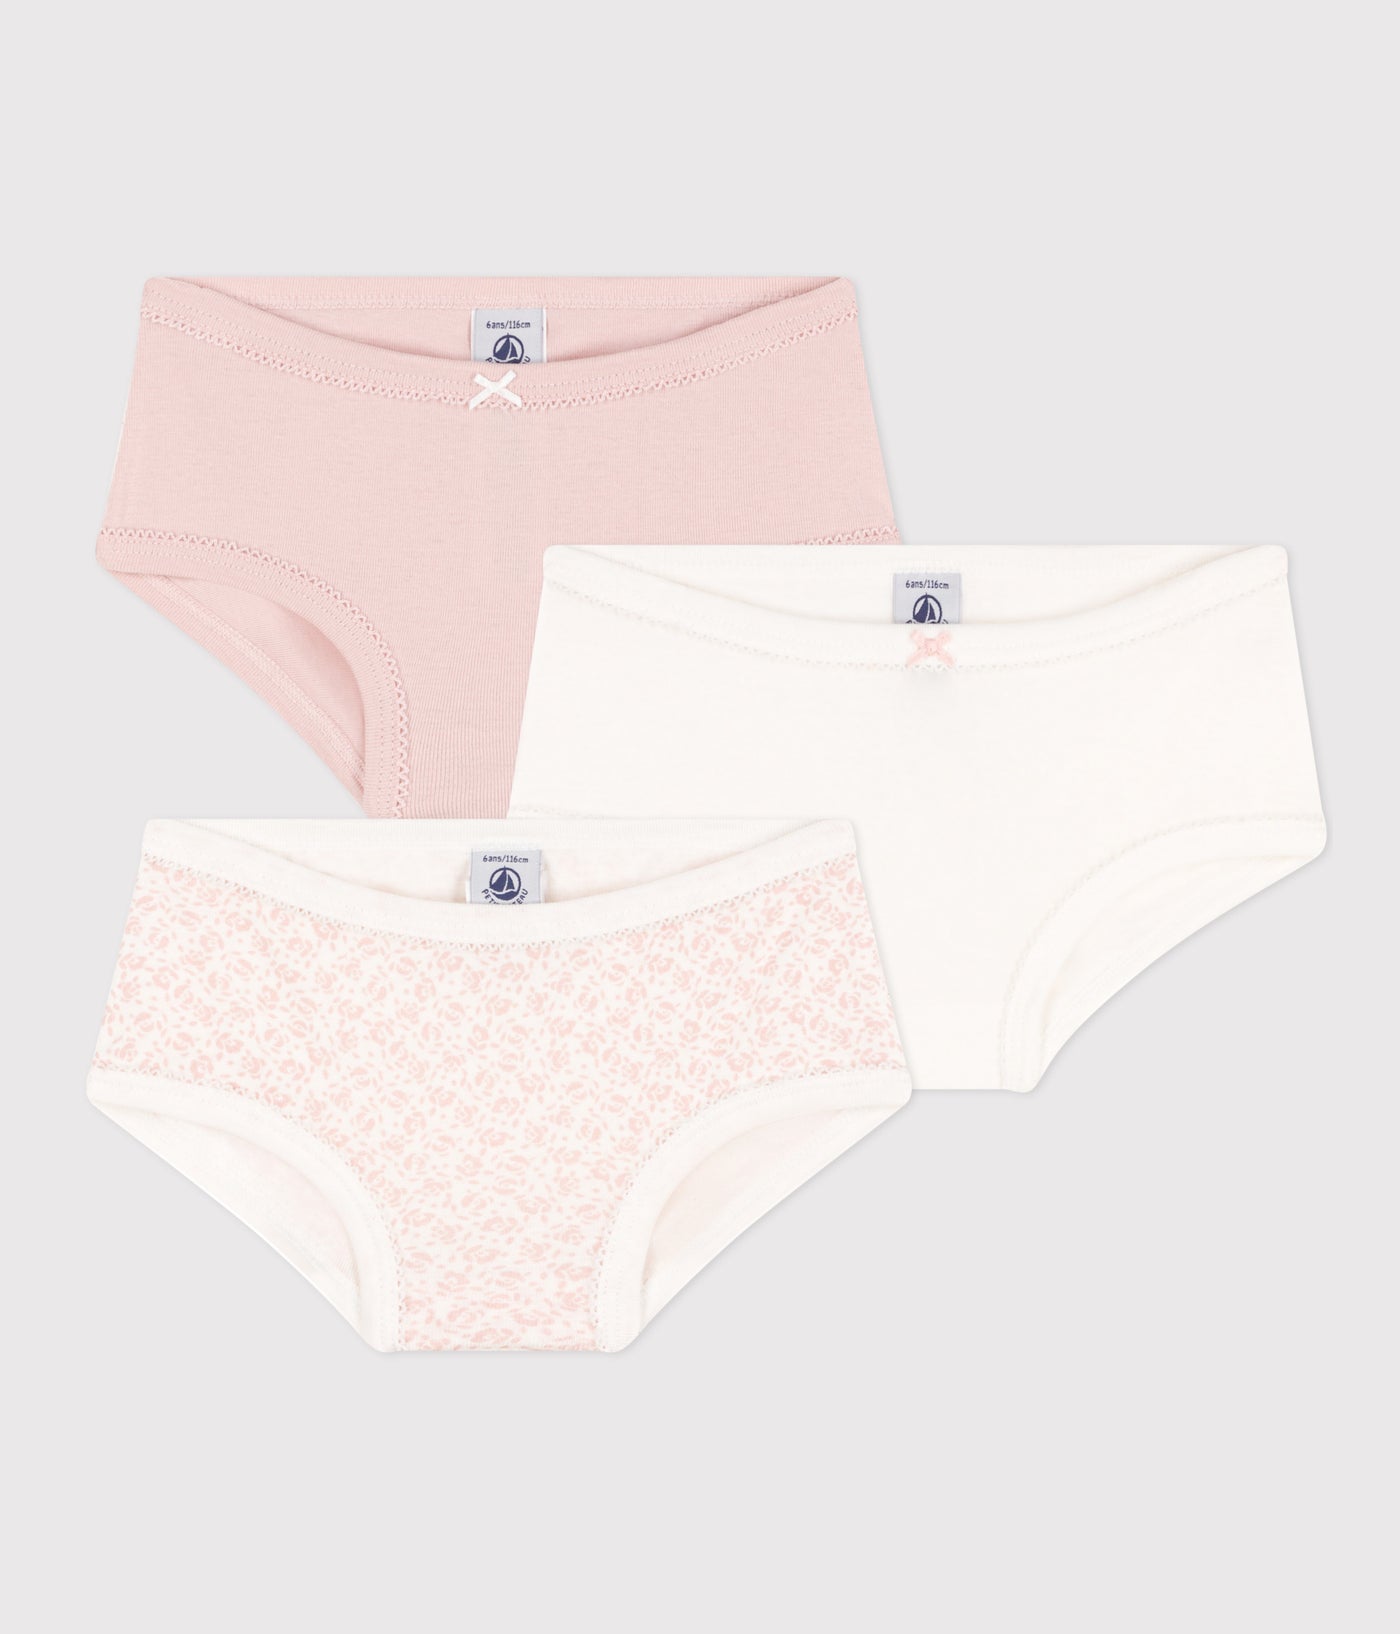 CHILDREN'S HIGH-WAISTED COTTON KNICKERS - 3-PACK